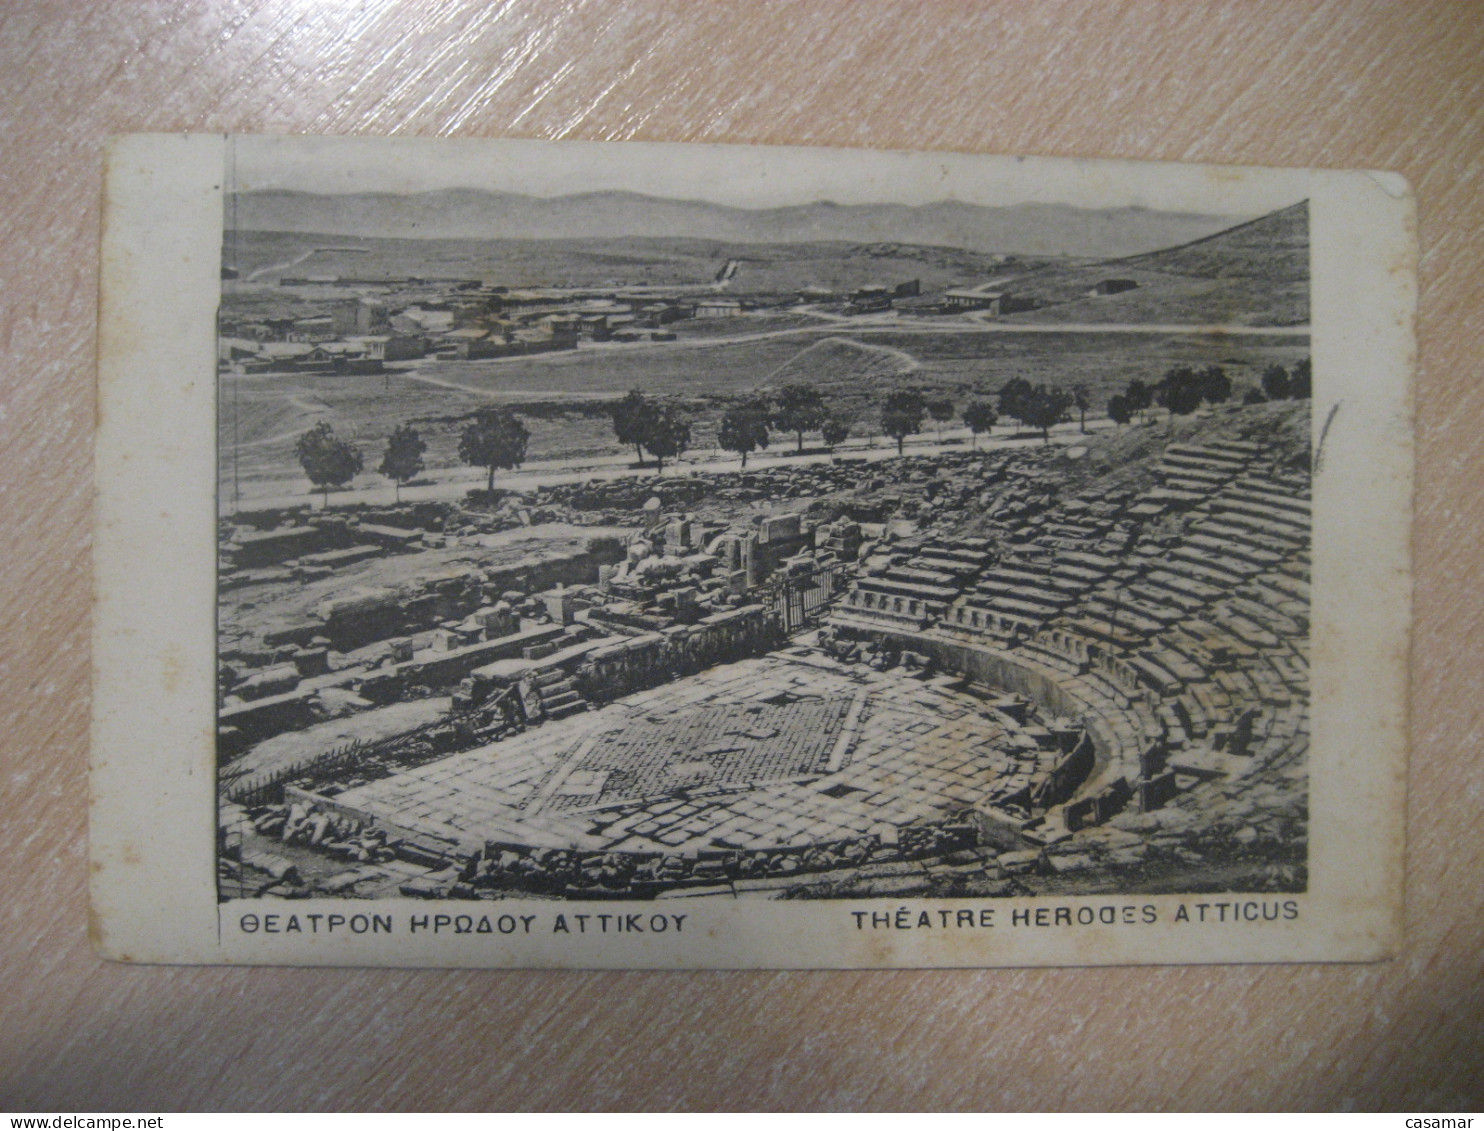 AOHNAI 1905 Mercur Mercury Stamps Theatre Herodes Atticus Postcard GREECE Archeology Archeologie Theater - Covers & Documents